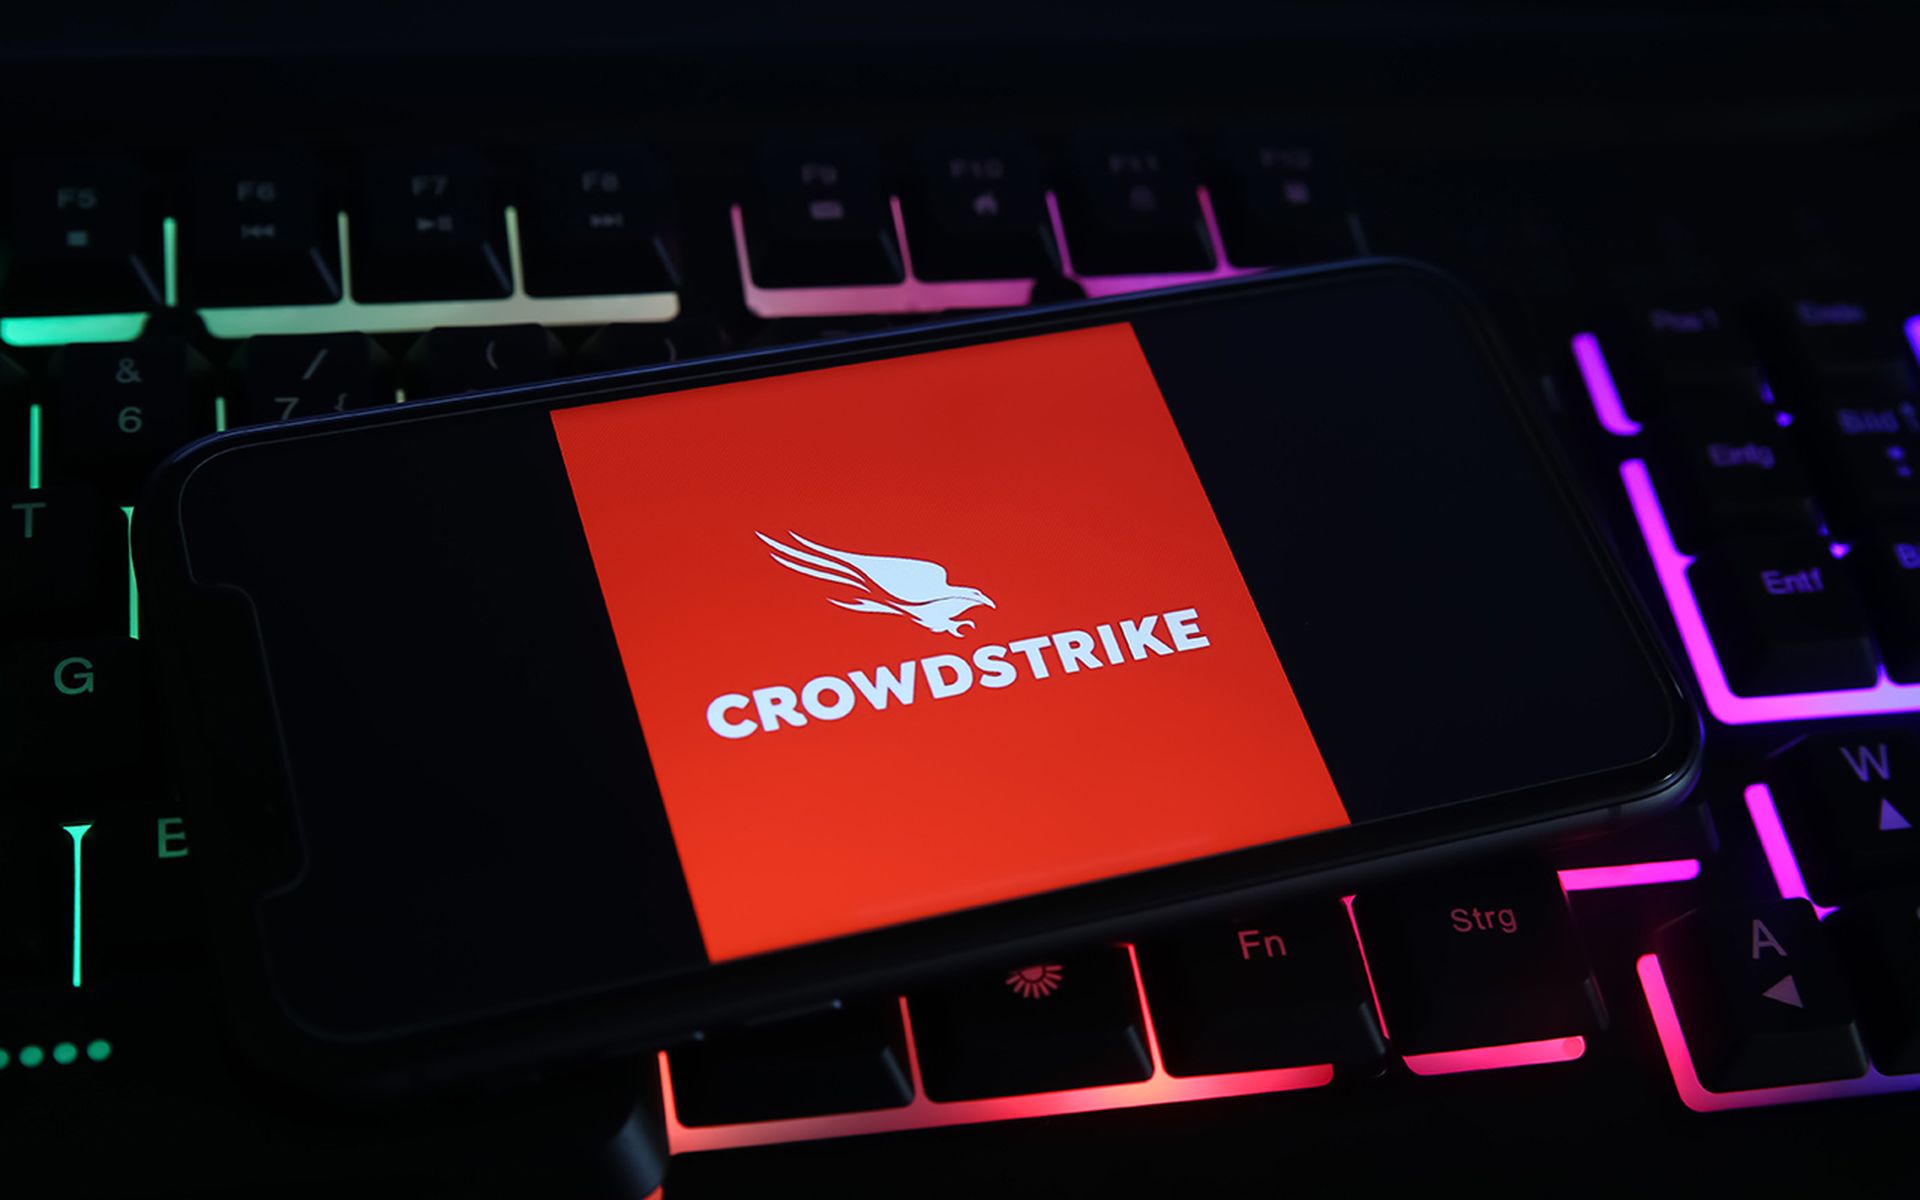 Closeup of mobile phone screen with logo lettering of crowdstrike cyber security company on computer keyboard